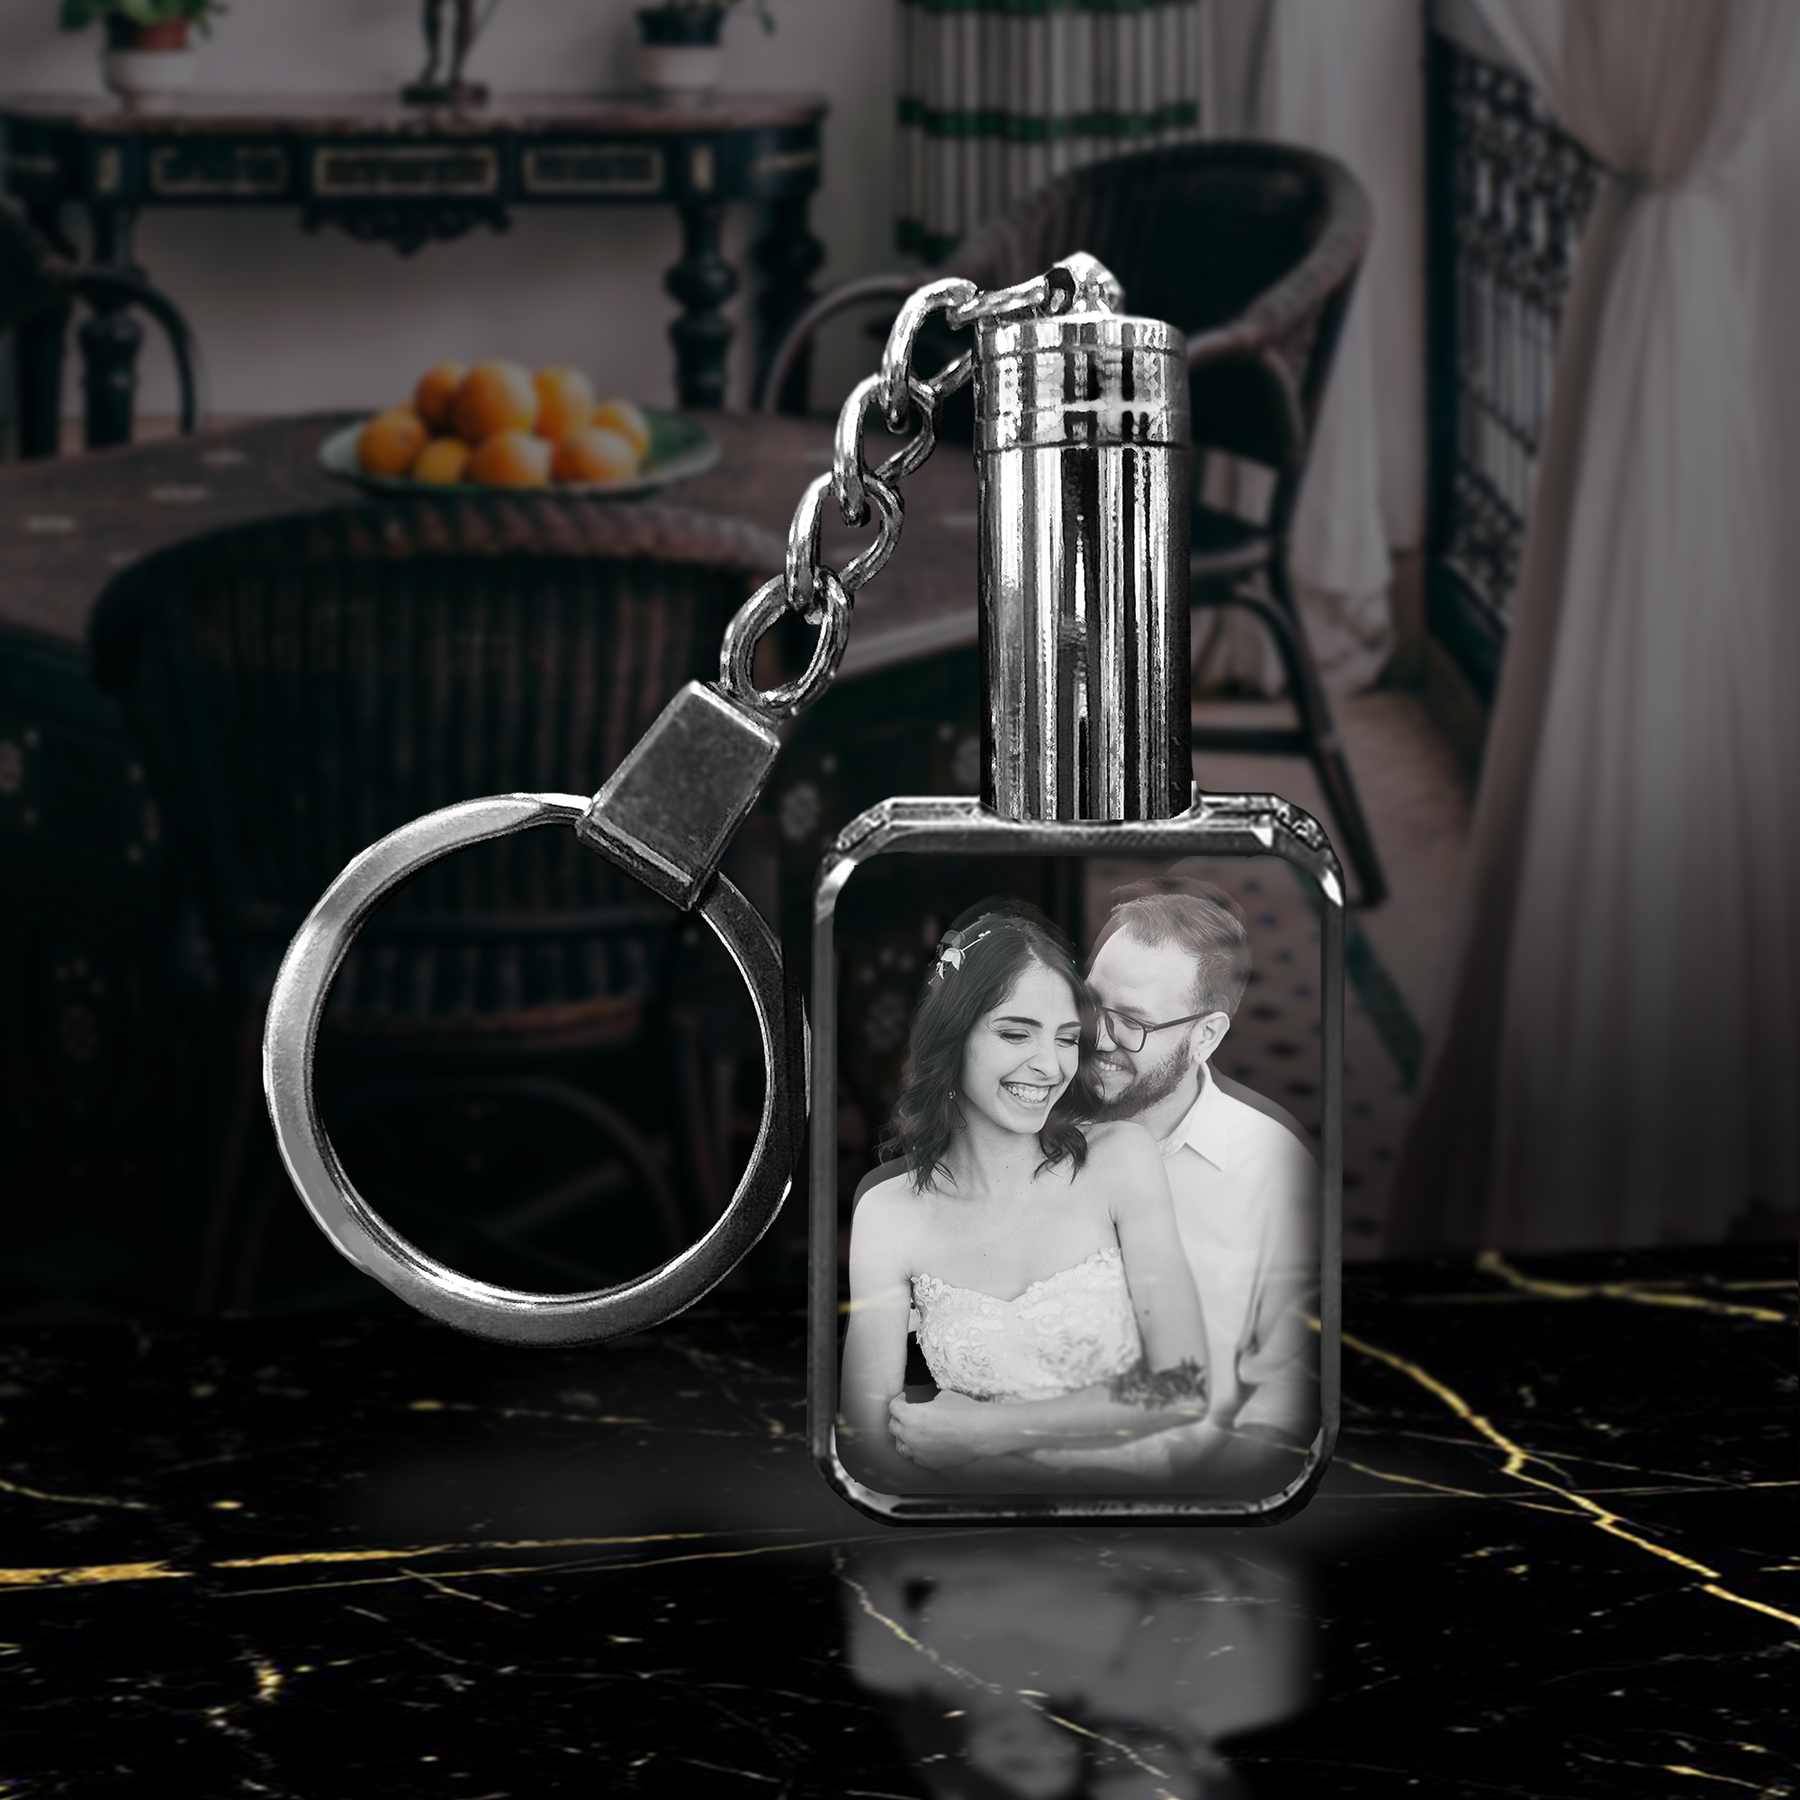 Shop Cheap Customized Key Ring Online – Crystal Moments